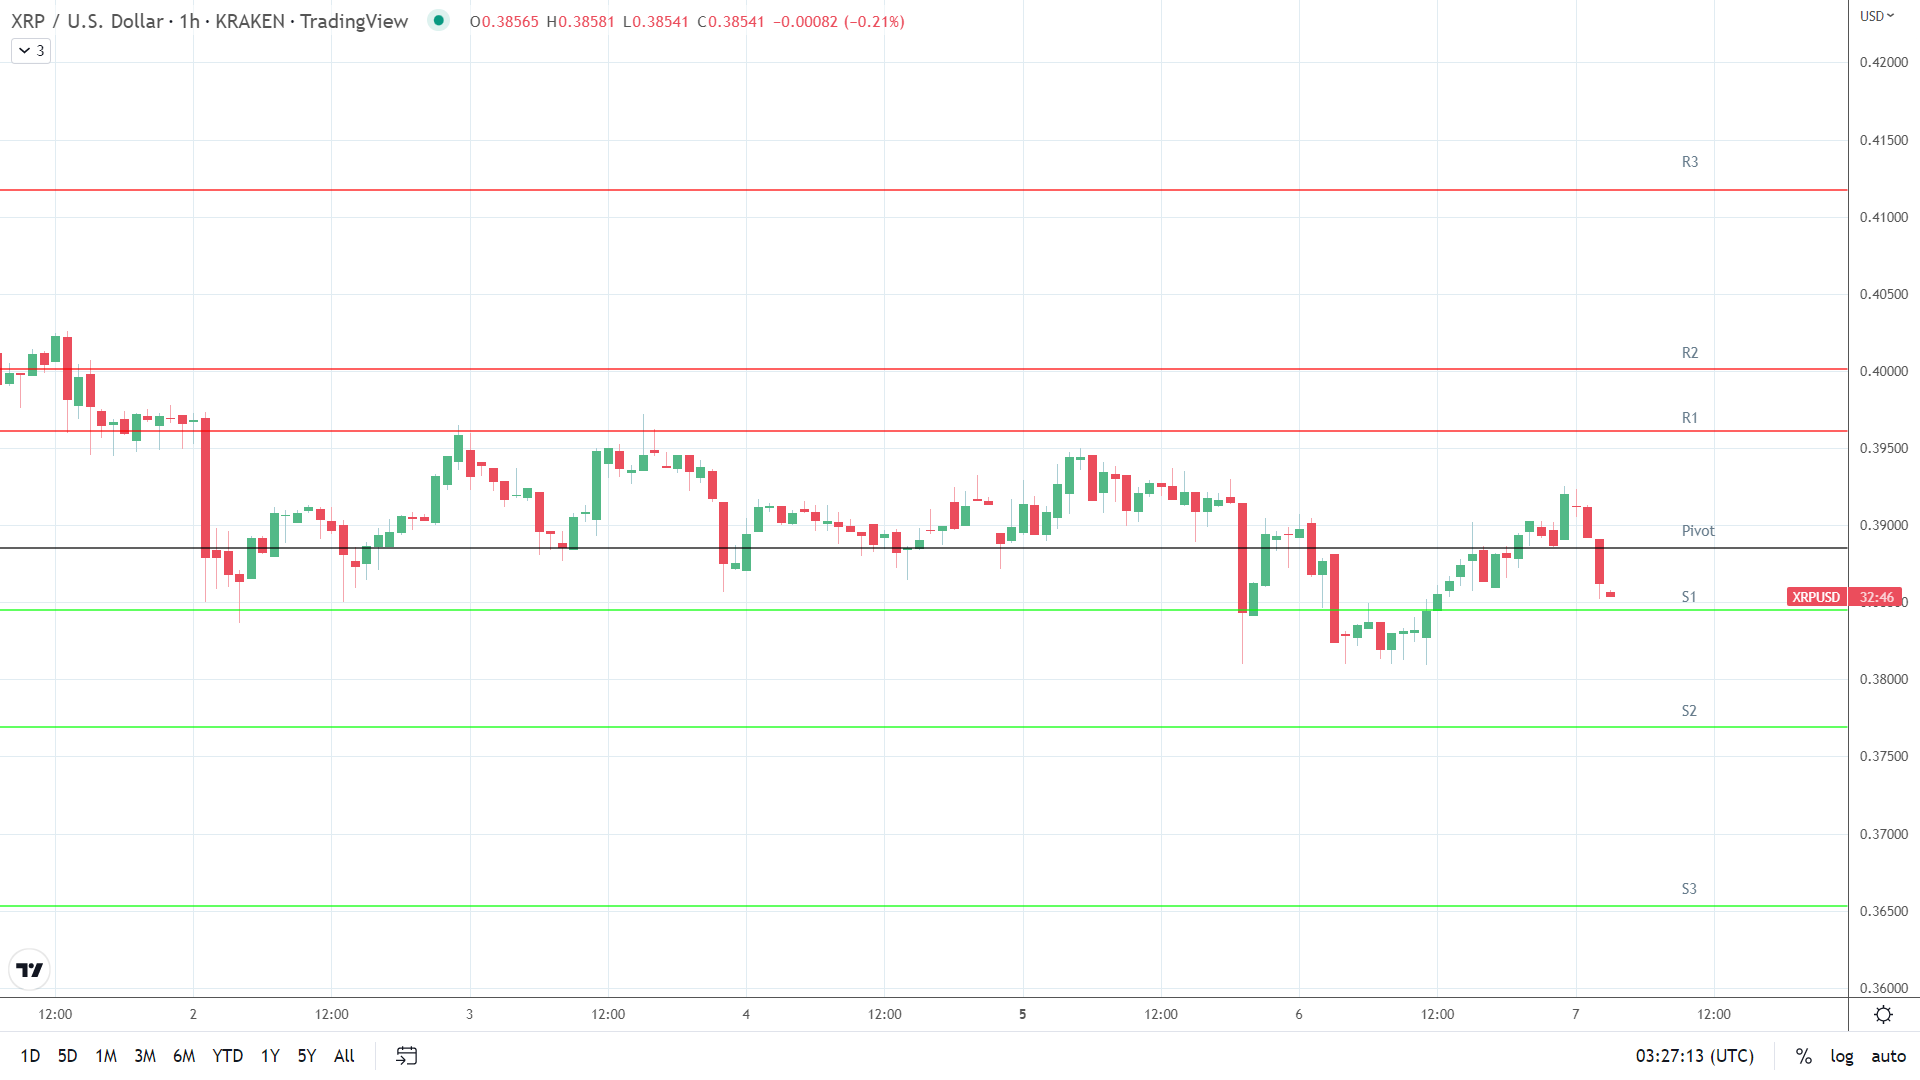 XRP support levels in play below the pivot.